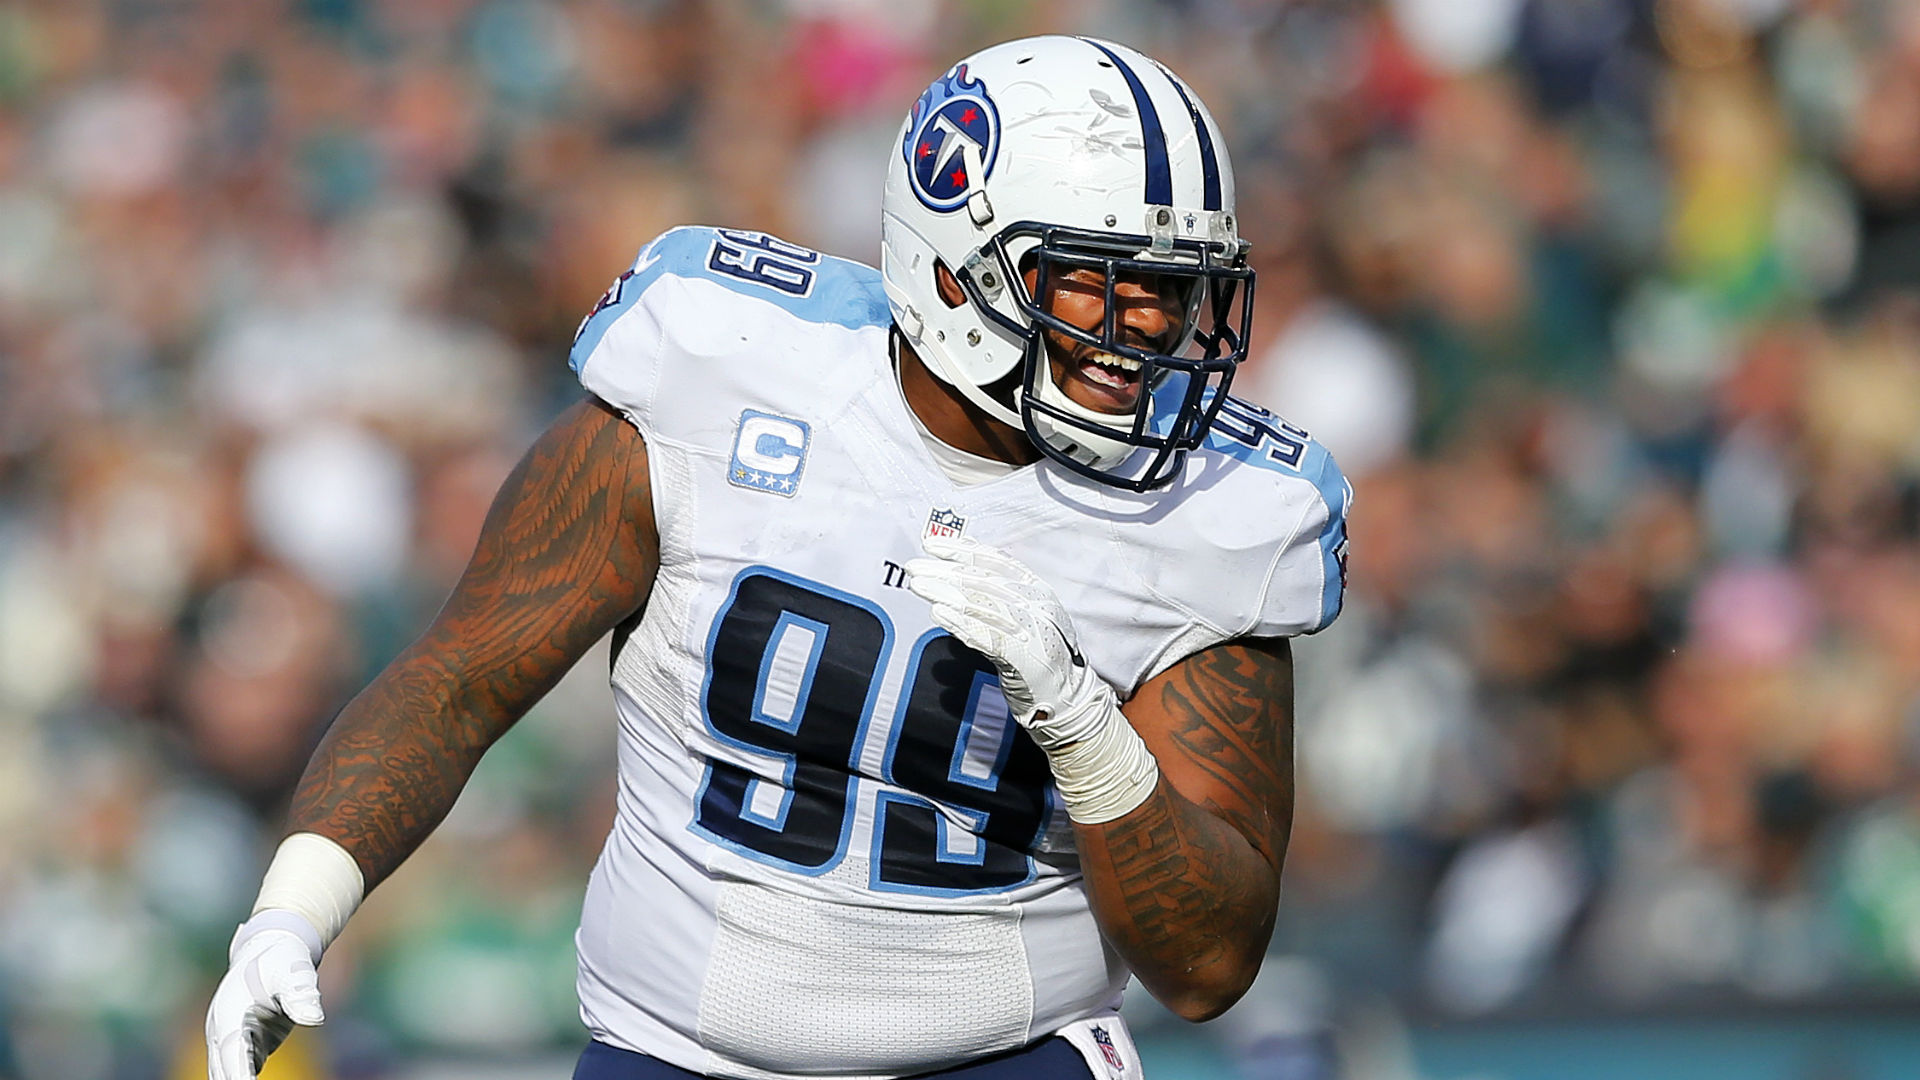 Titans' Jurrell Casey ready for playoff moment, but 'pissed' about losing division to Jags